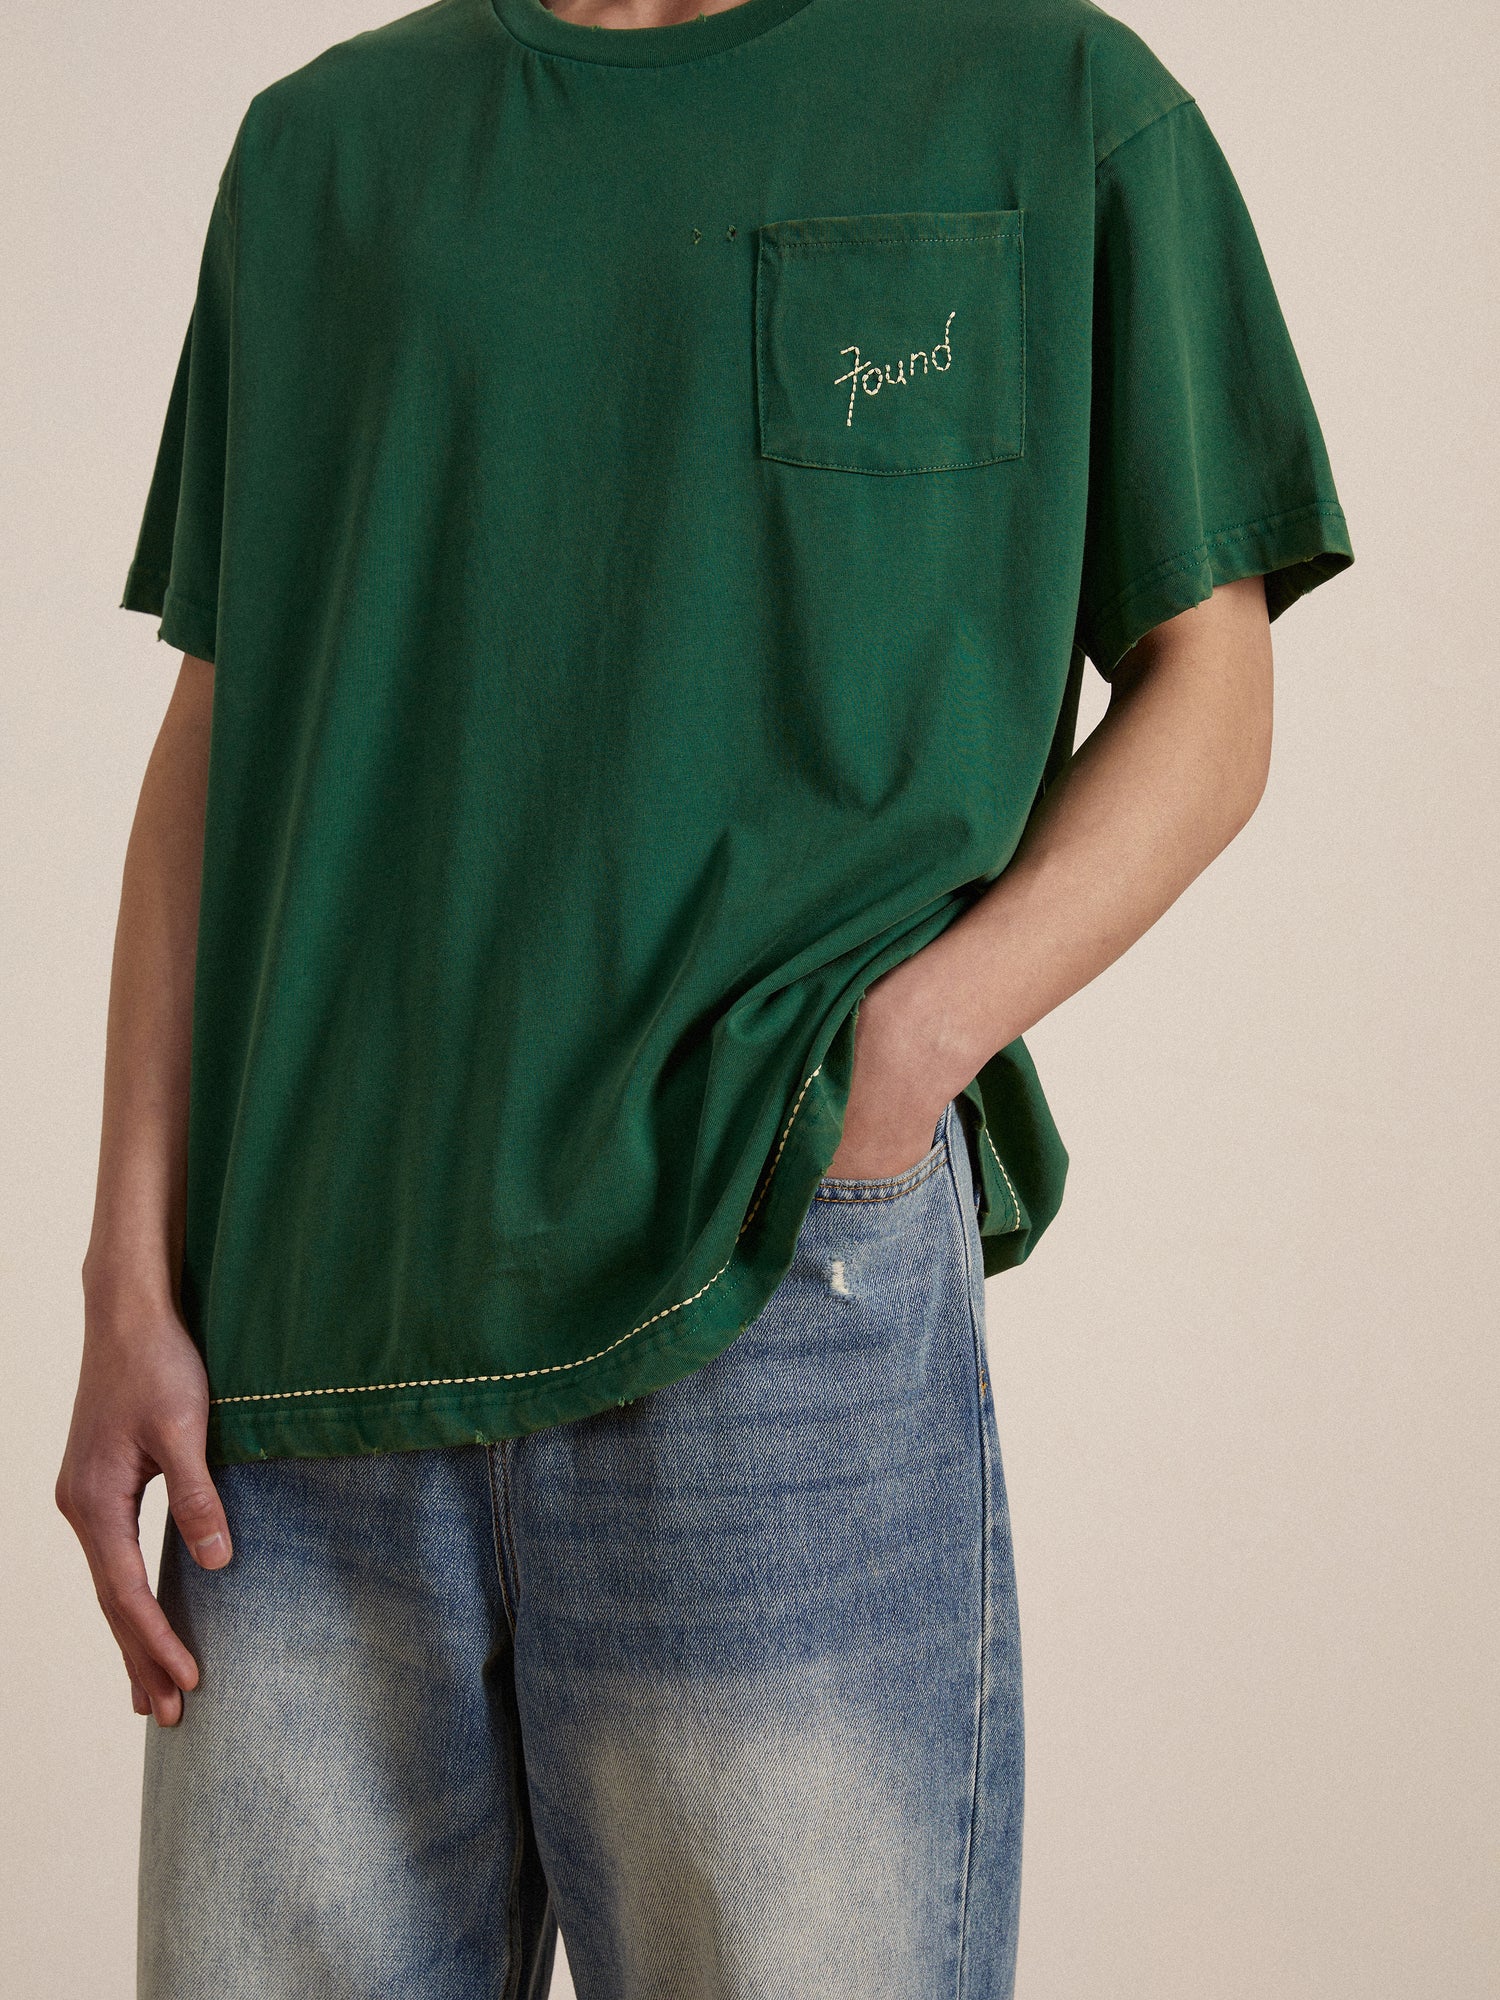 A man wearing a green Found Embroidered Logo Tee and jeans.